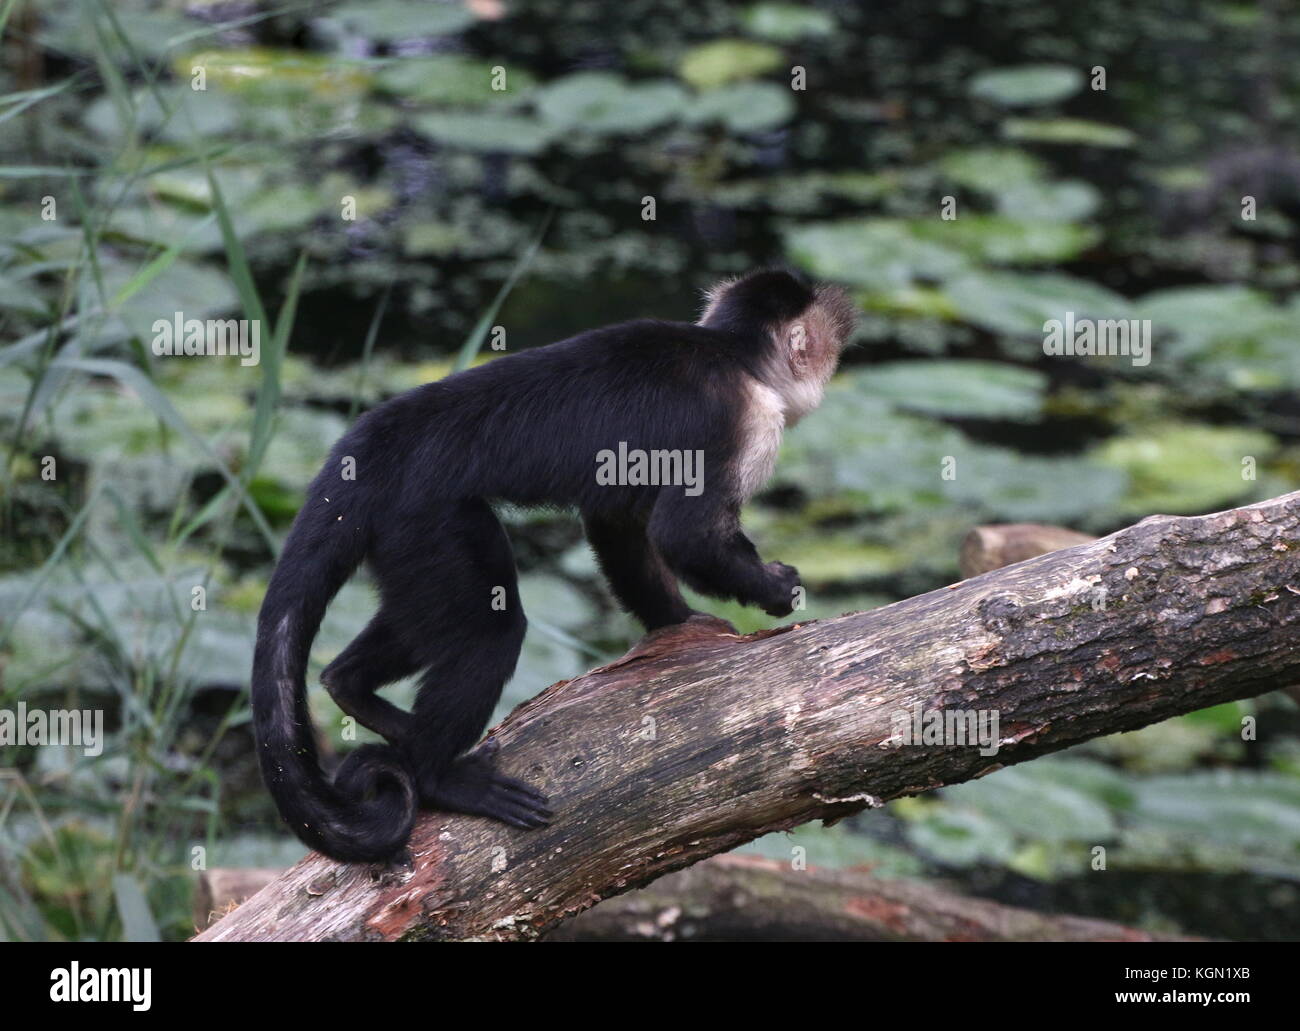 Central American White headed capuchin monkey (Cebus capucinus) crossing a river on a log. Stock Photo